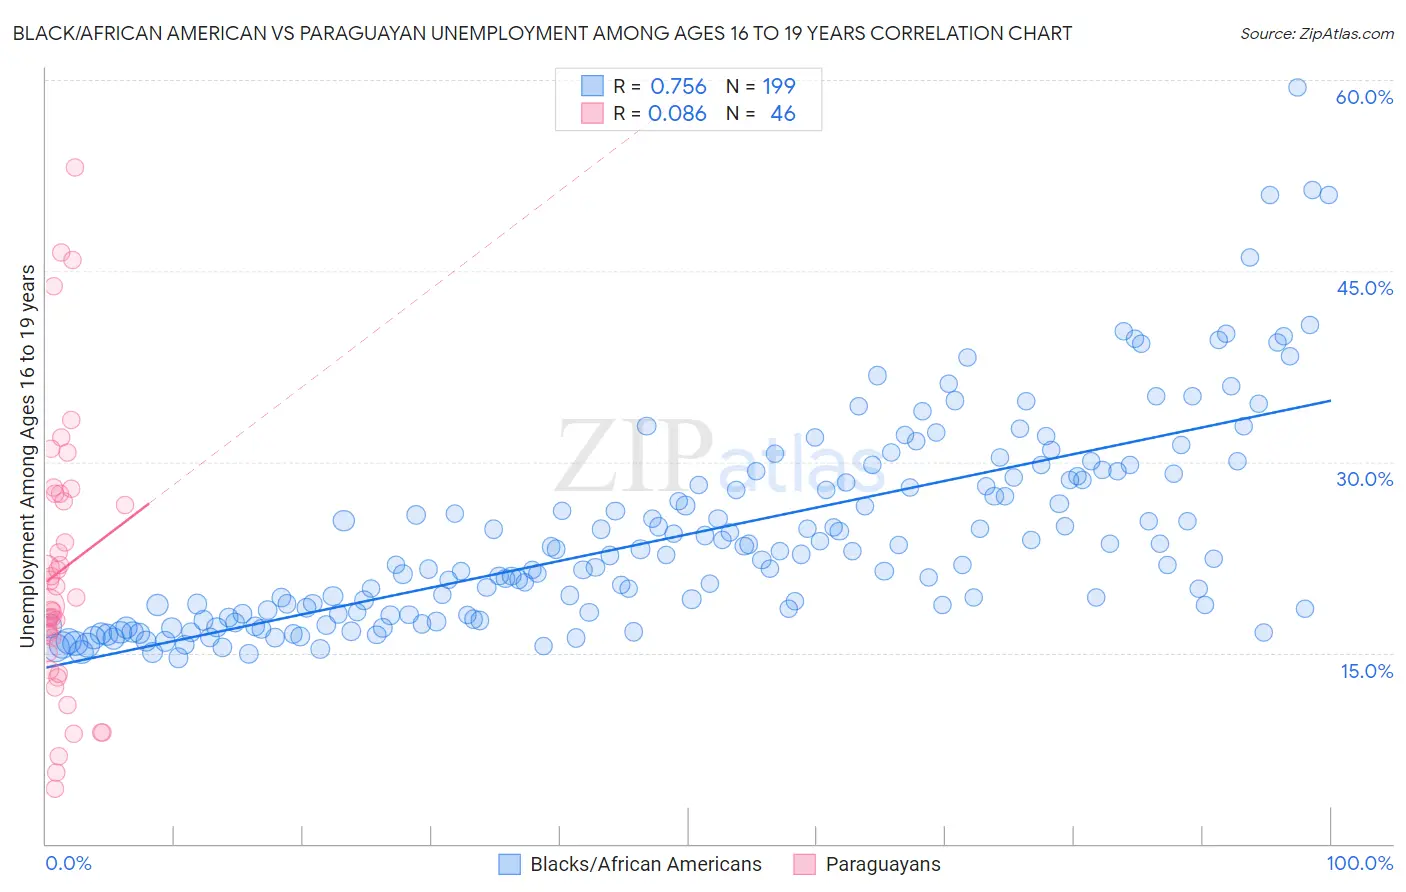 Black/African American vs Paraguayan Unemployment Among Ages 16 to 19 years